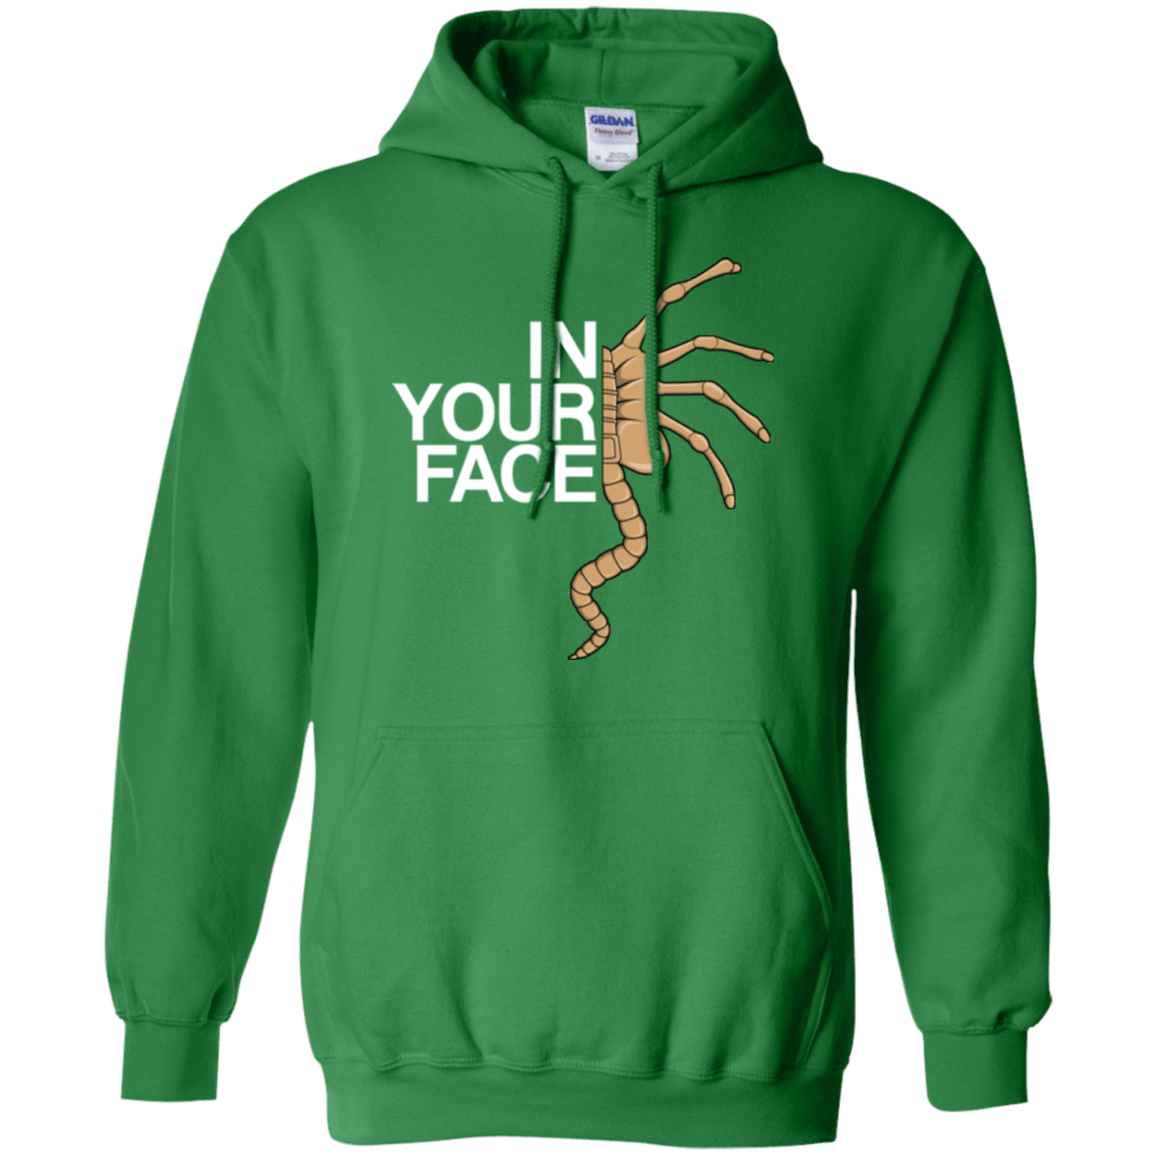 Sweatshirts Irish Green / Small IN YOUR FACE Pullover Hoodie